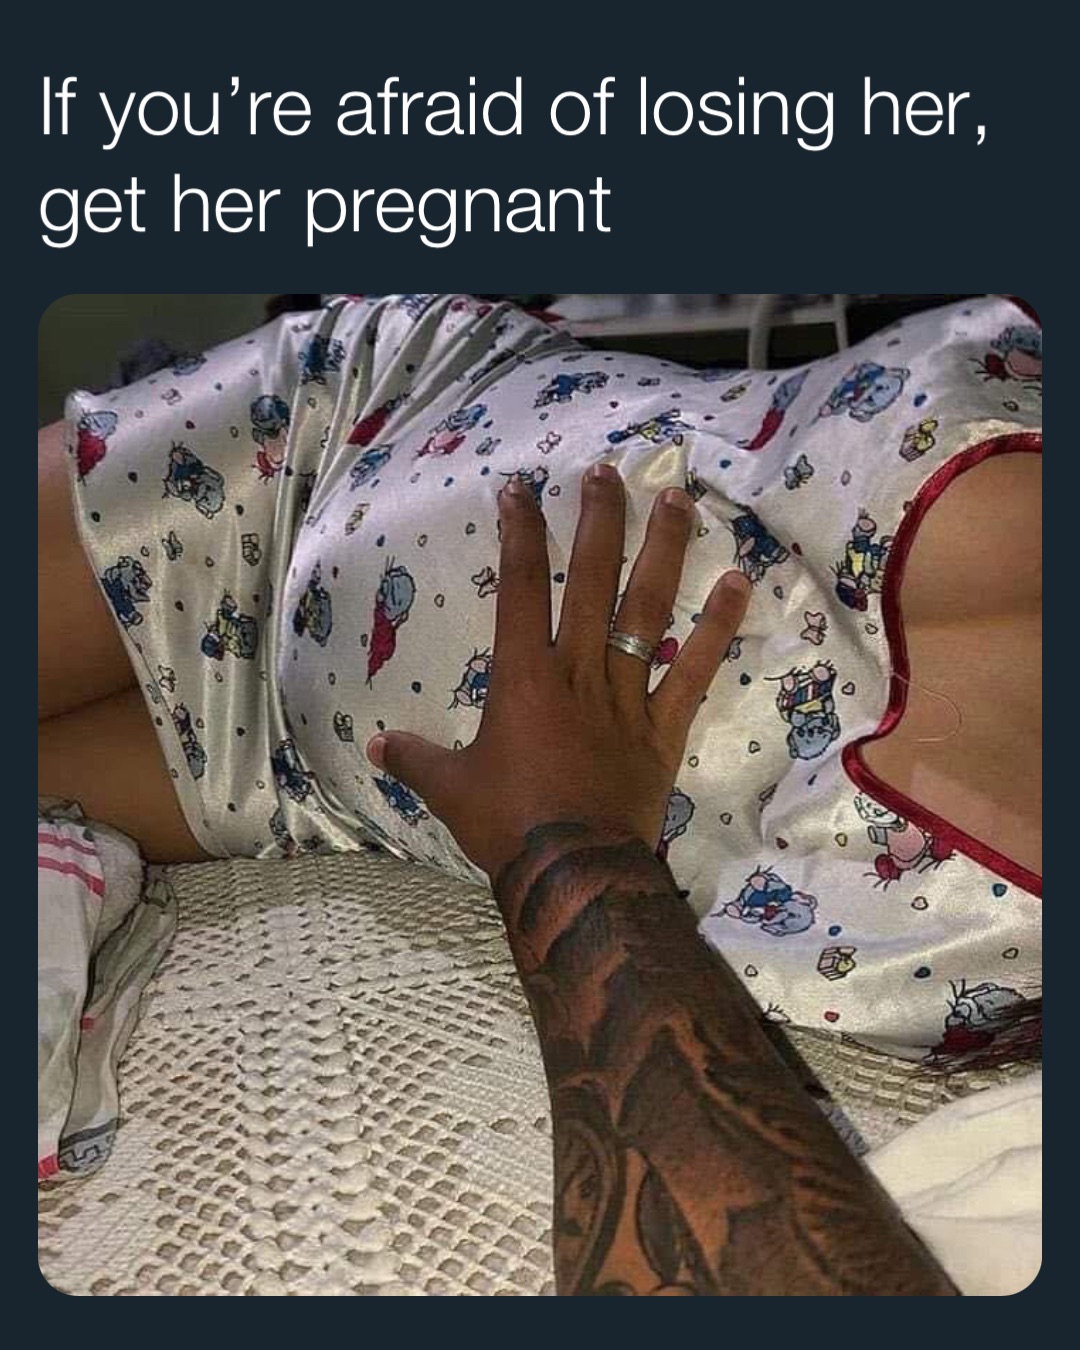 If you’re afraid of losing her, get her pregnant